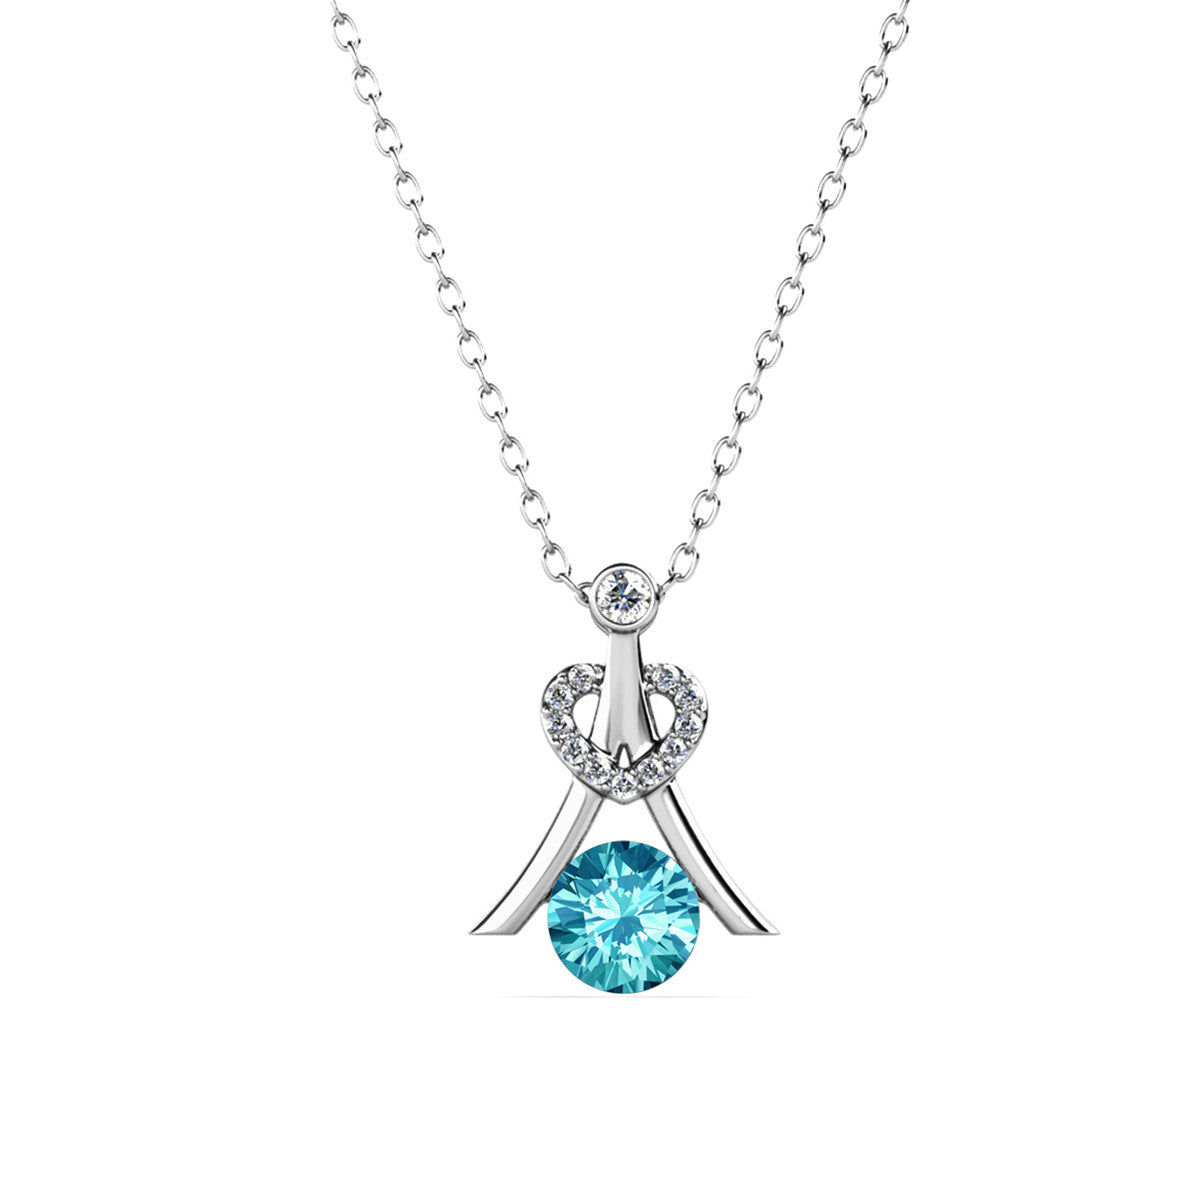 Serenity March Birthstone Aquamarine Necklace, 18k White Gold Plated Silver Necklace with Round Cut Crystals